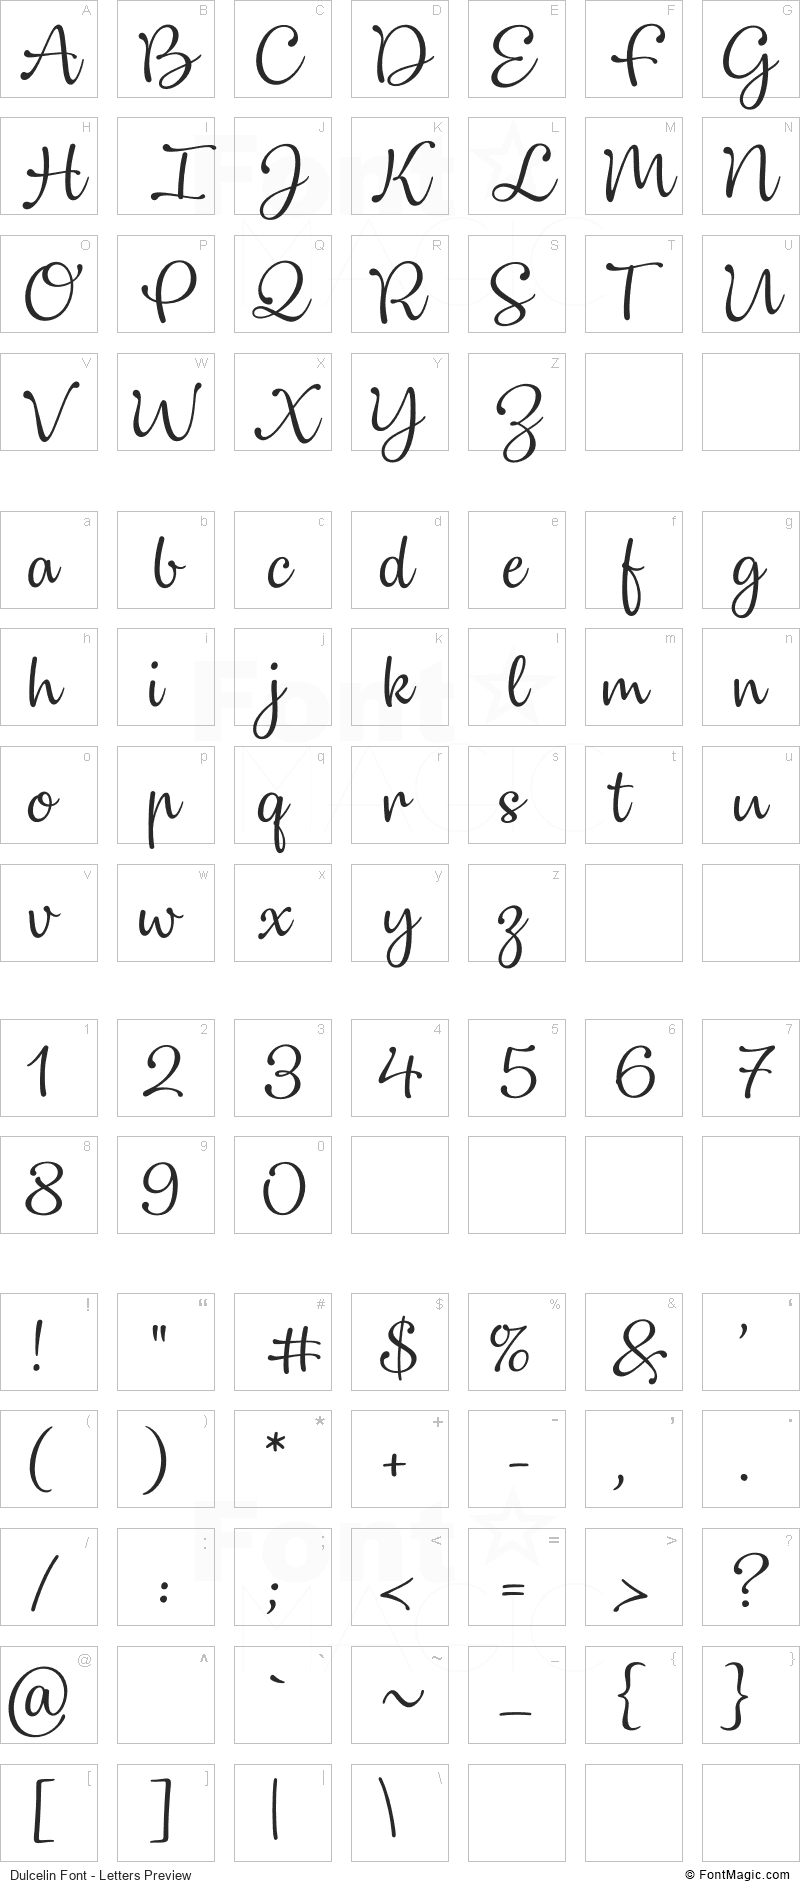 Dulcelin Font - All Latters Preview Chart